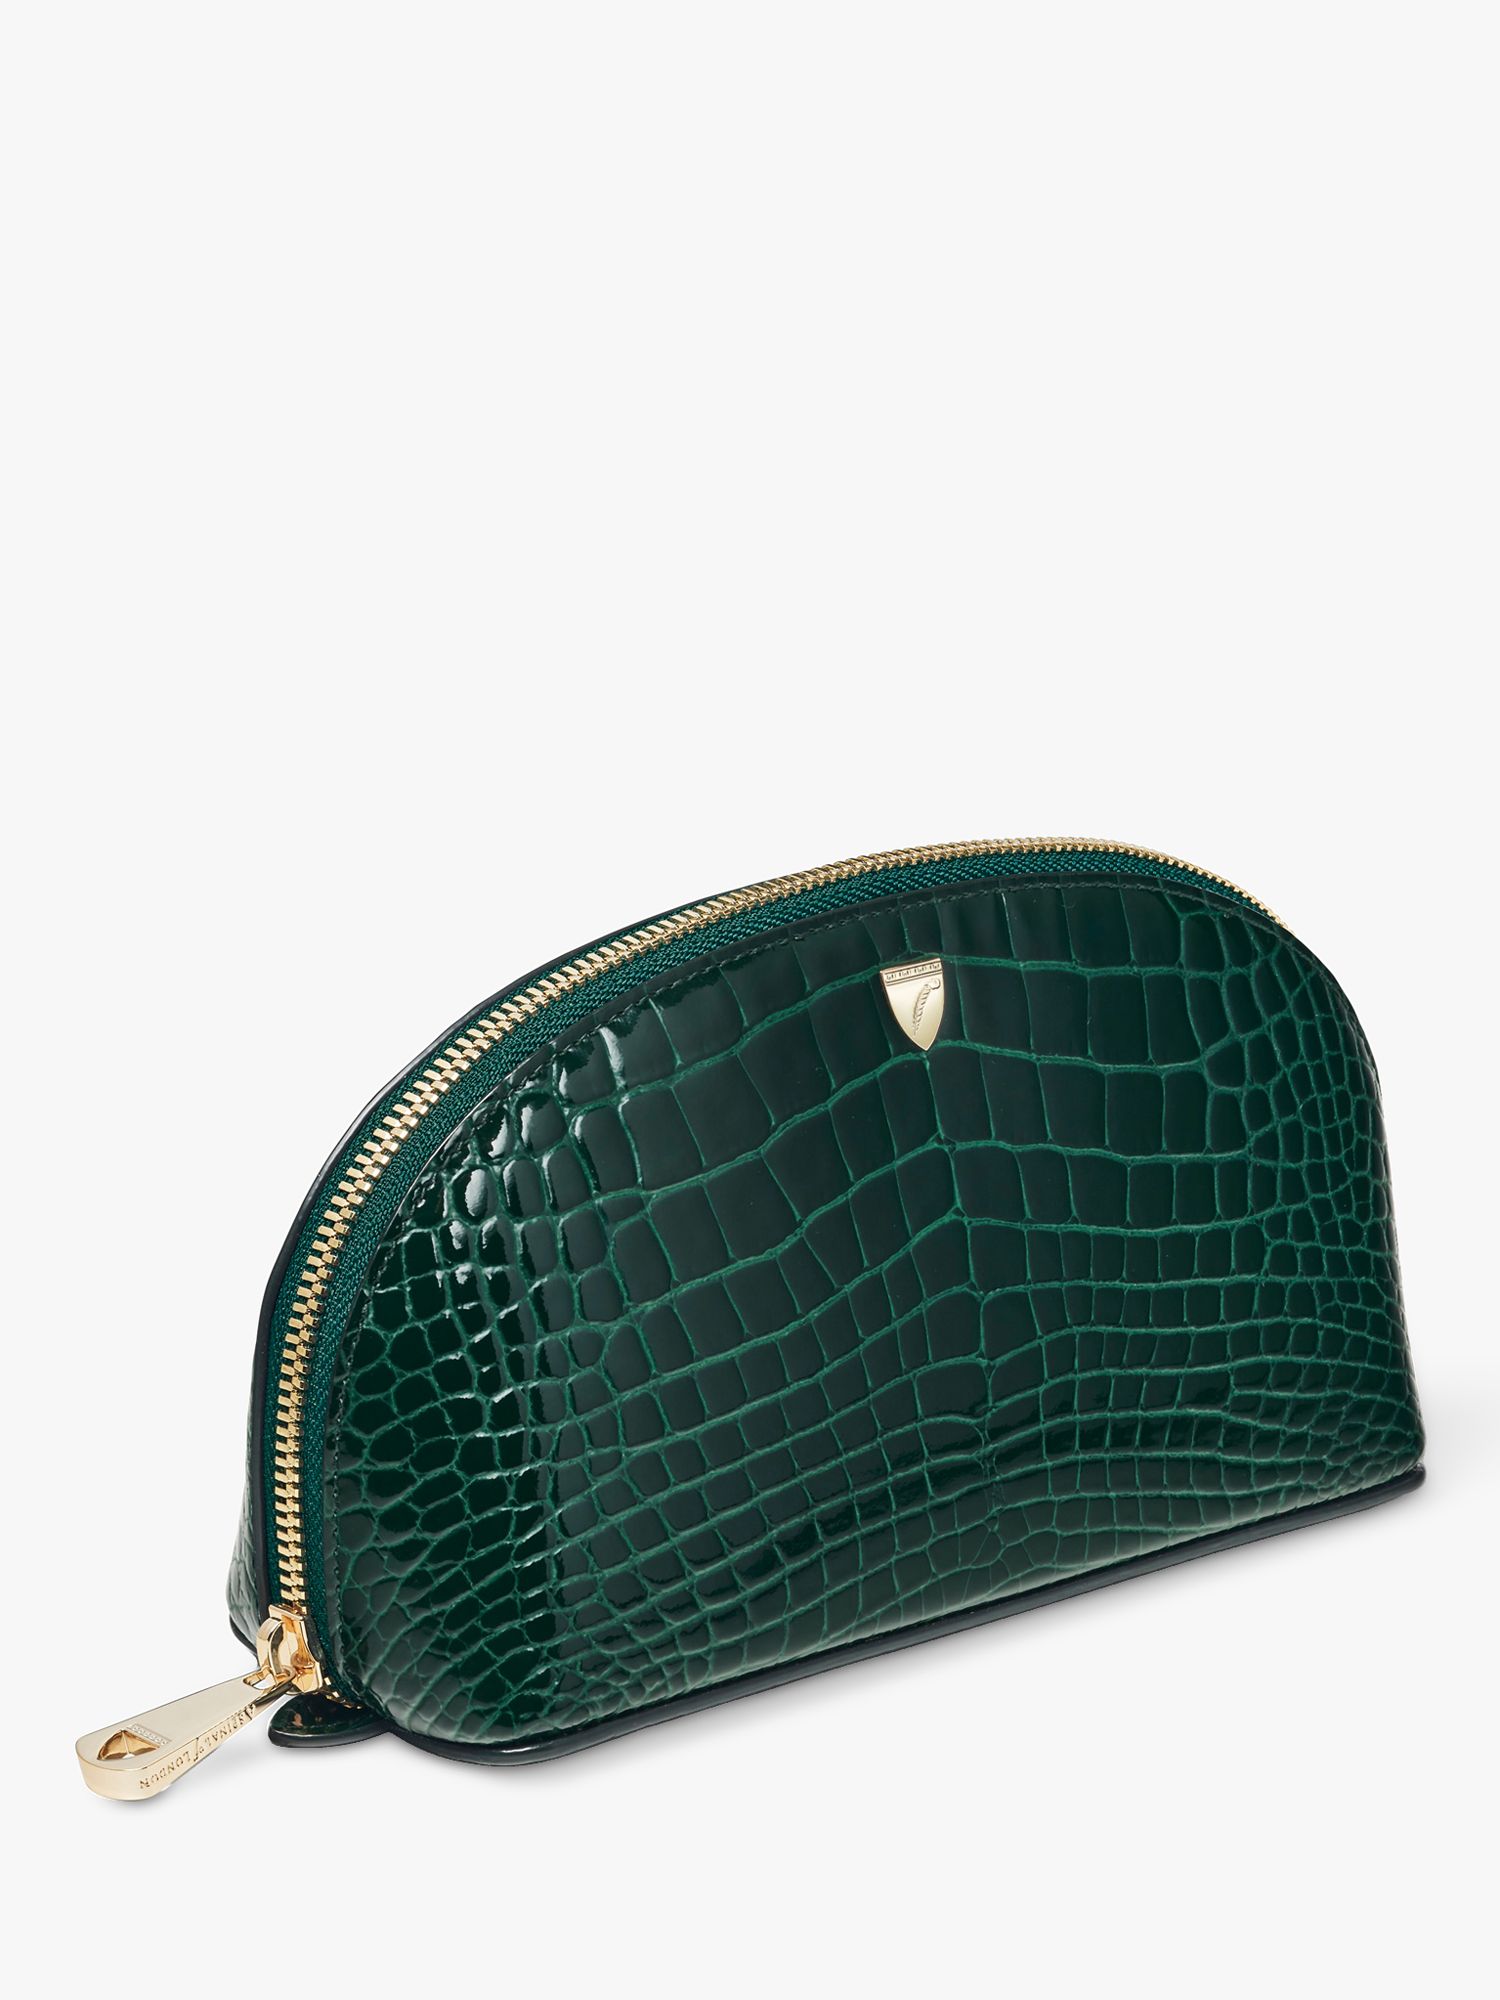 Aspinal of London Small Croc Effect Leather Cosmetic Case, Evergreen 3